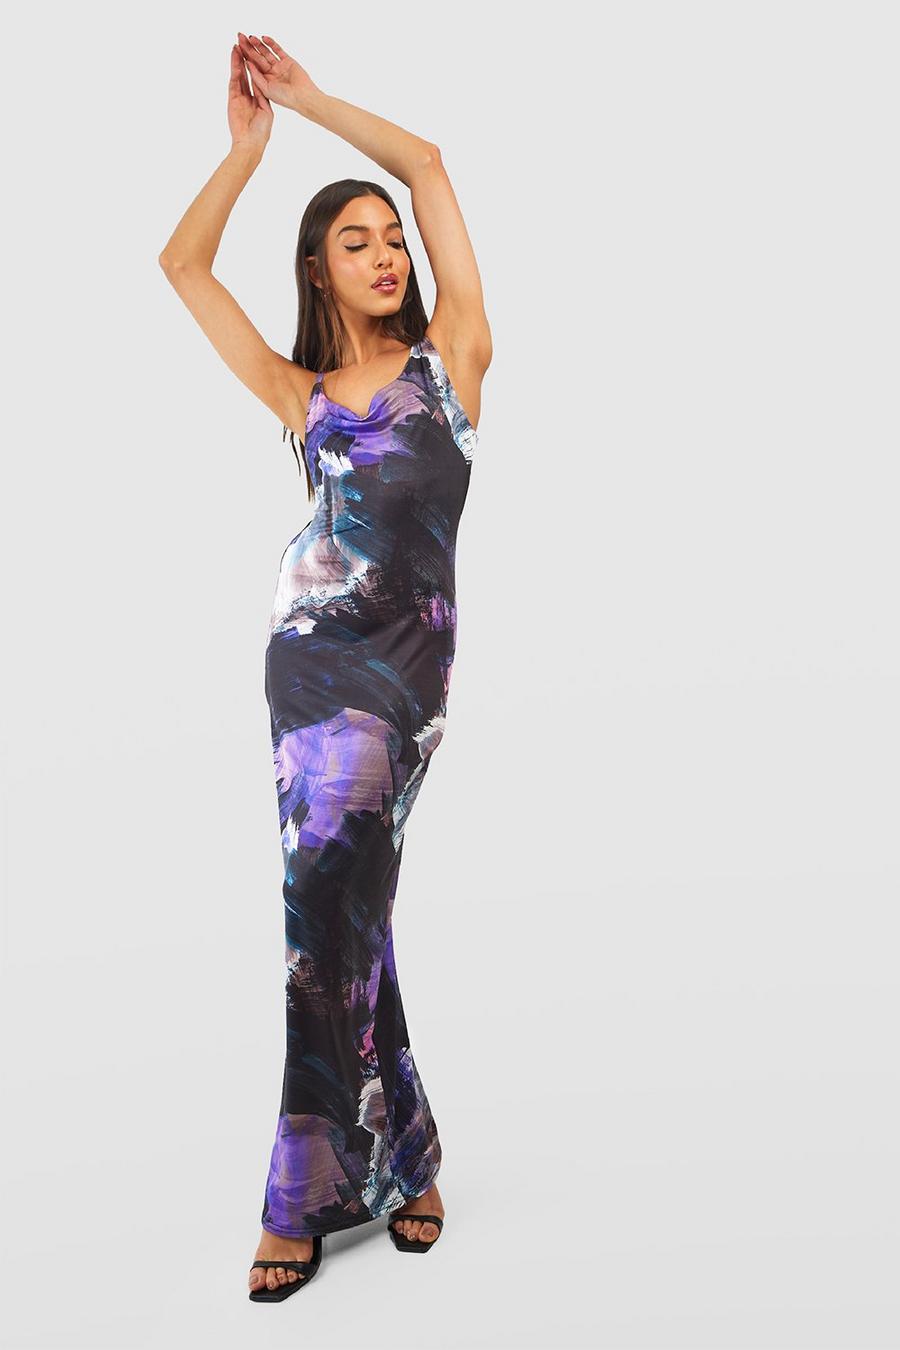 Vintage slinky sexy floral fitted spaghetti strap maxi dress women's